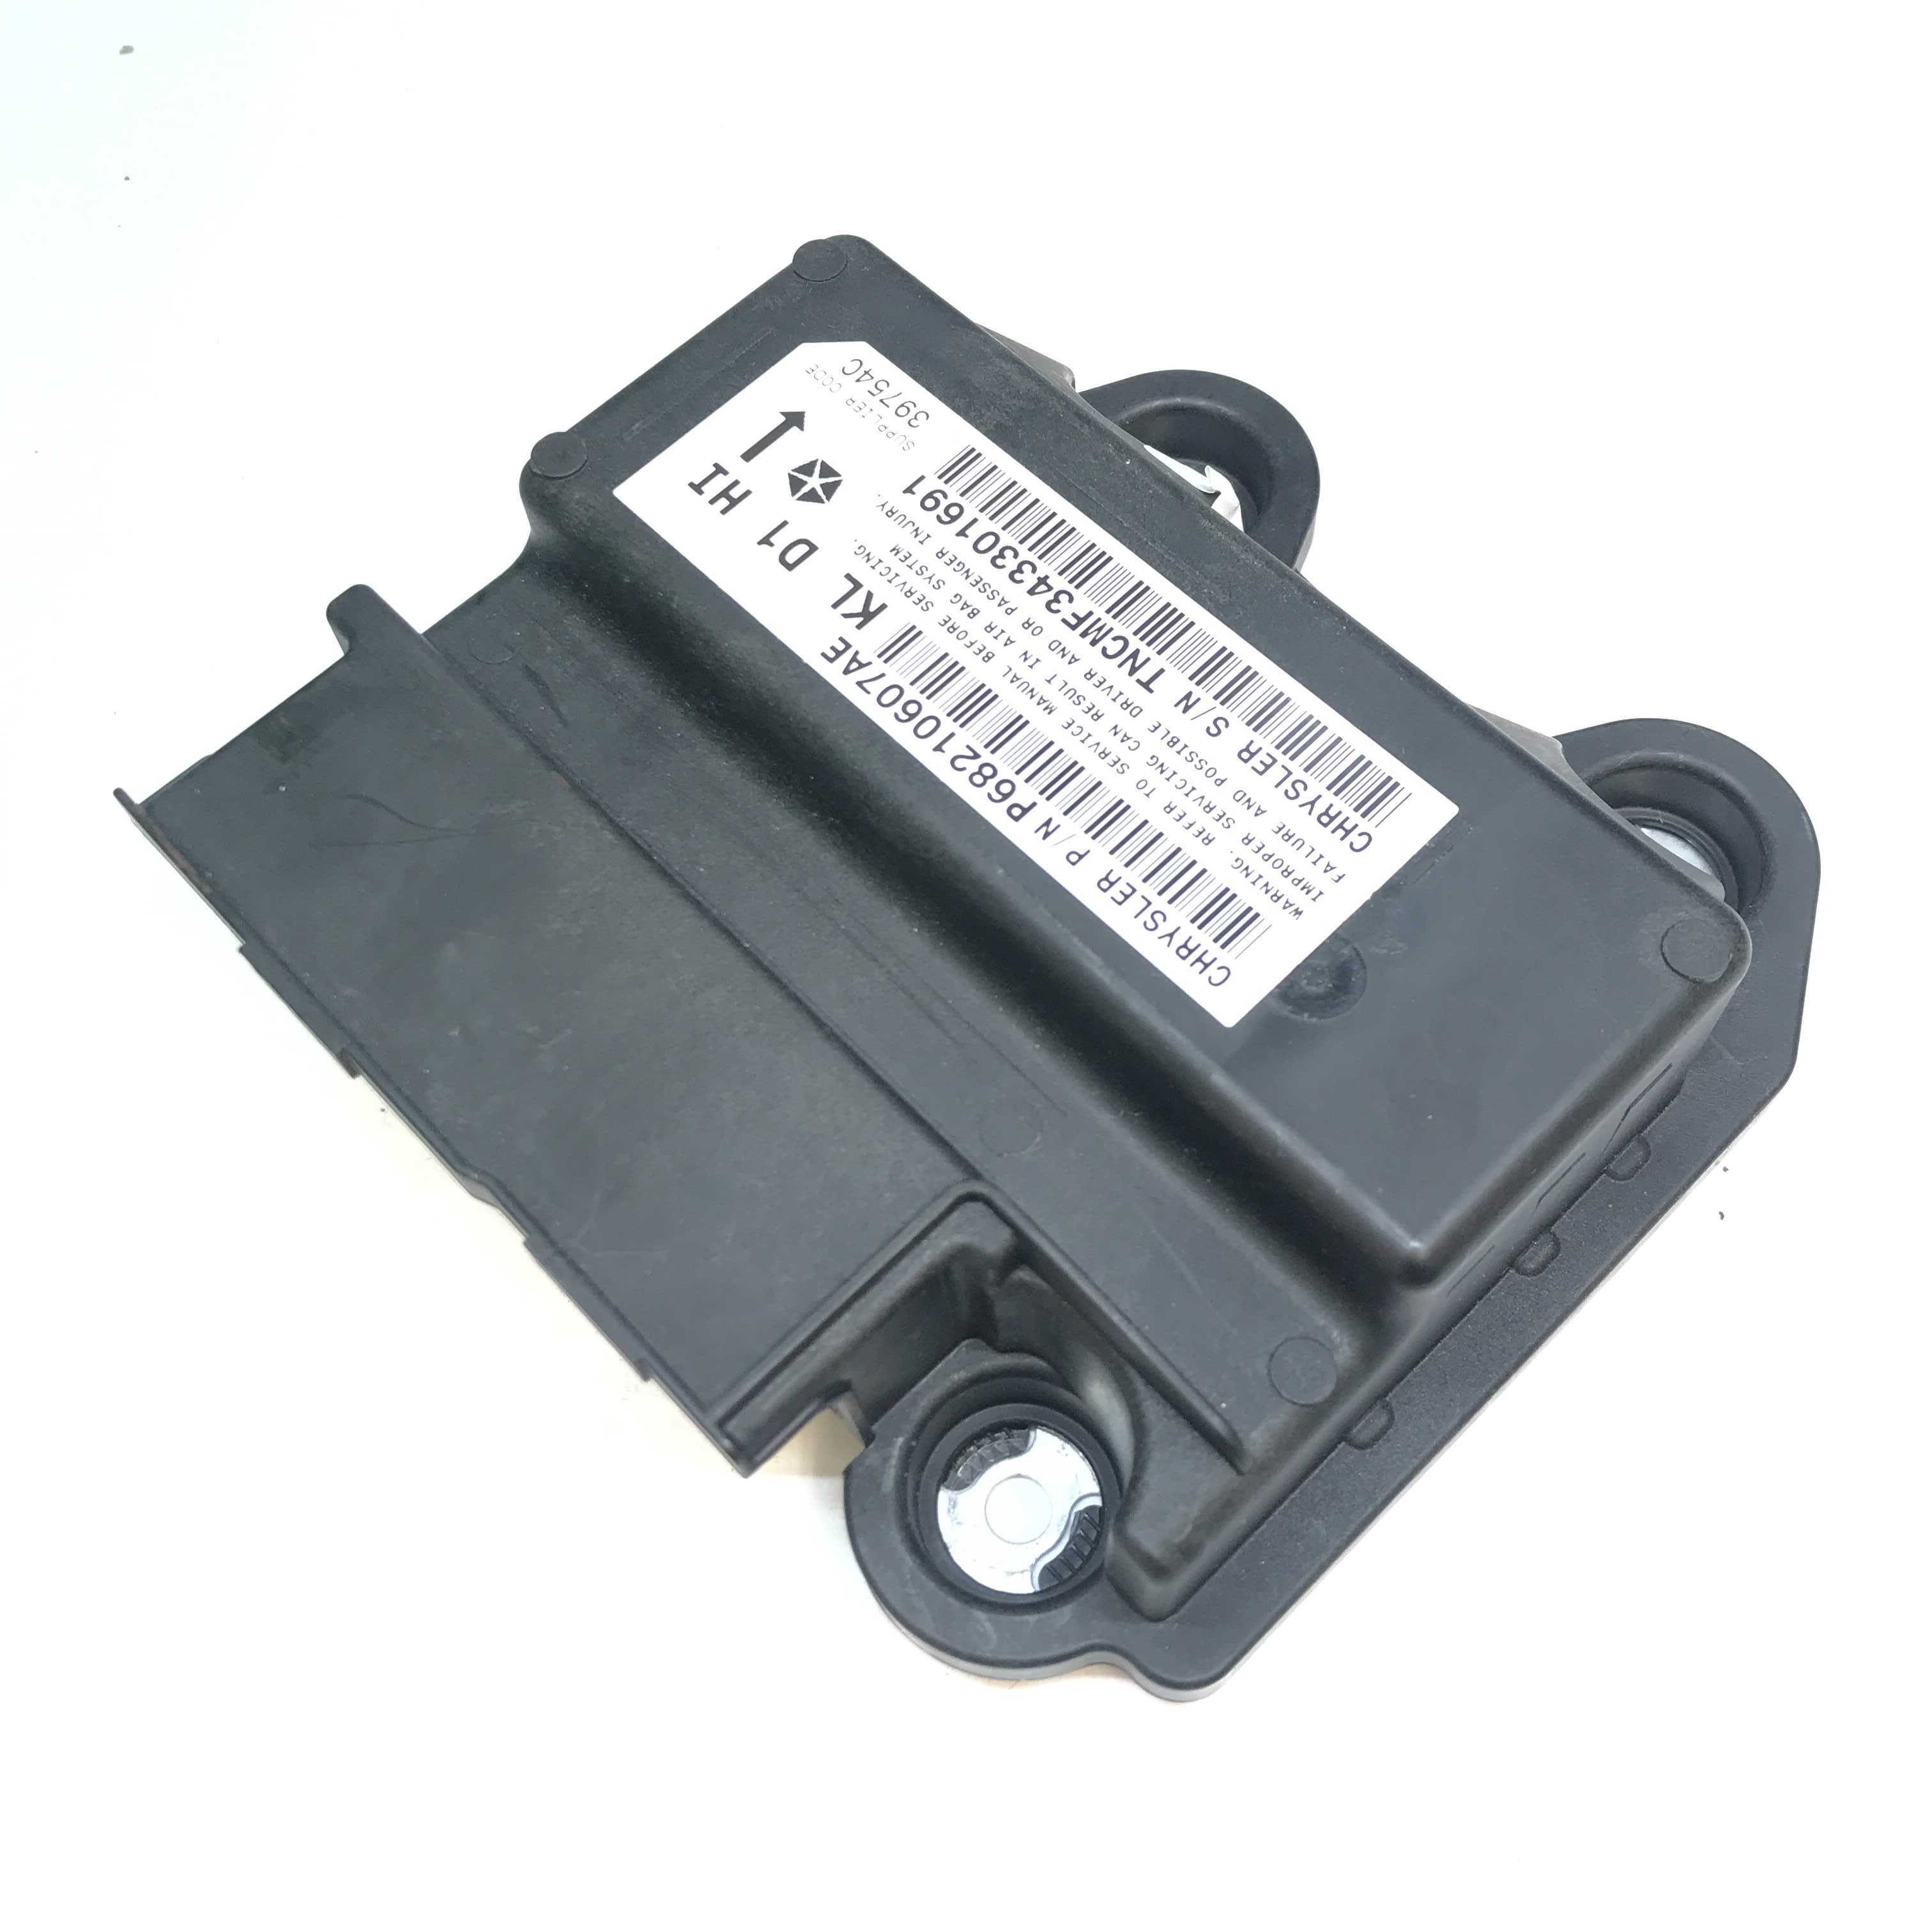 JEEP CHEROKEE SRS ORC ORM Occupant Control Module - Airbag Computer Control Module PART #P68210607AE